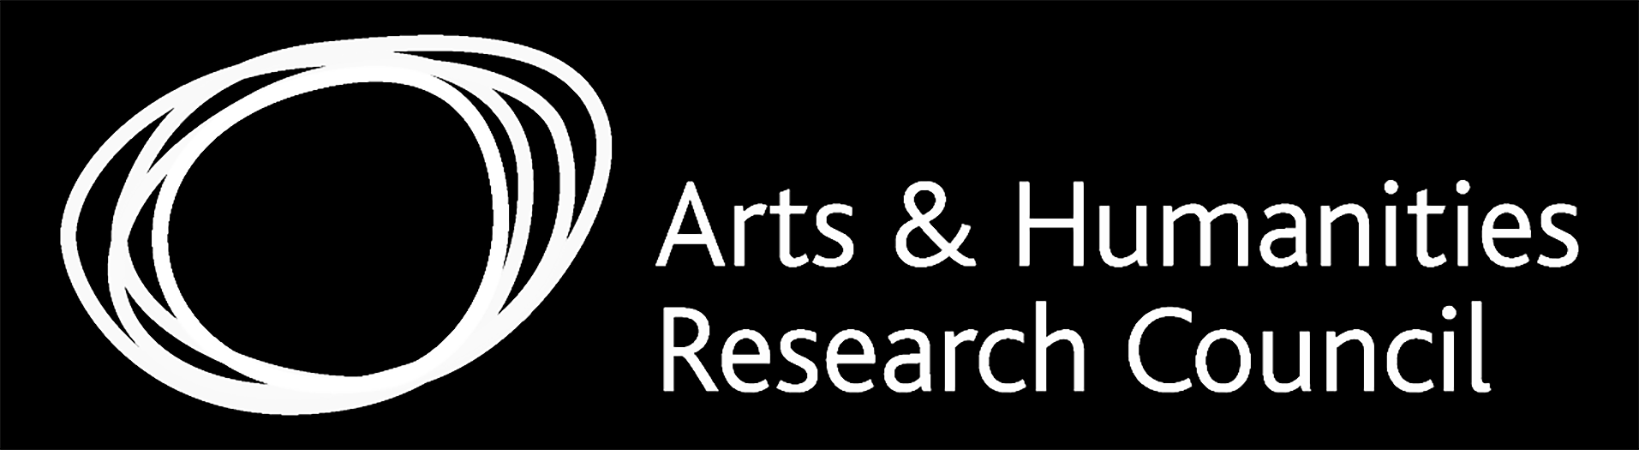 Art & Humanities Research Council